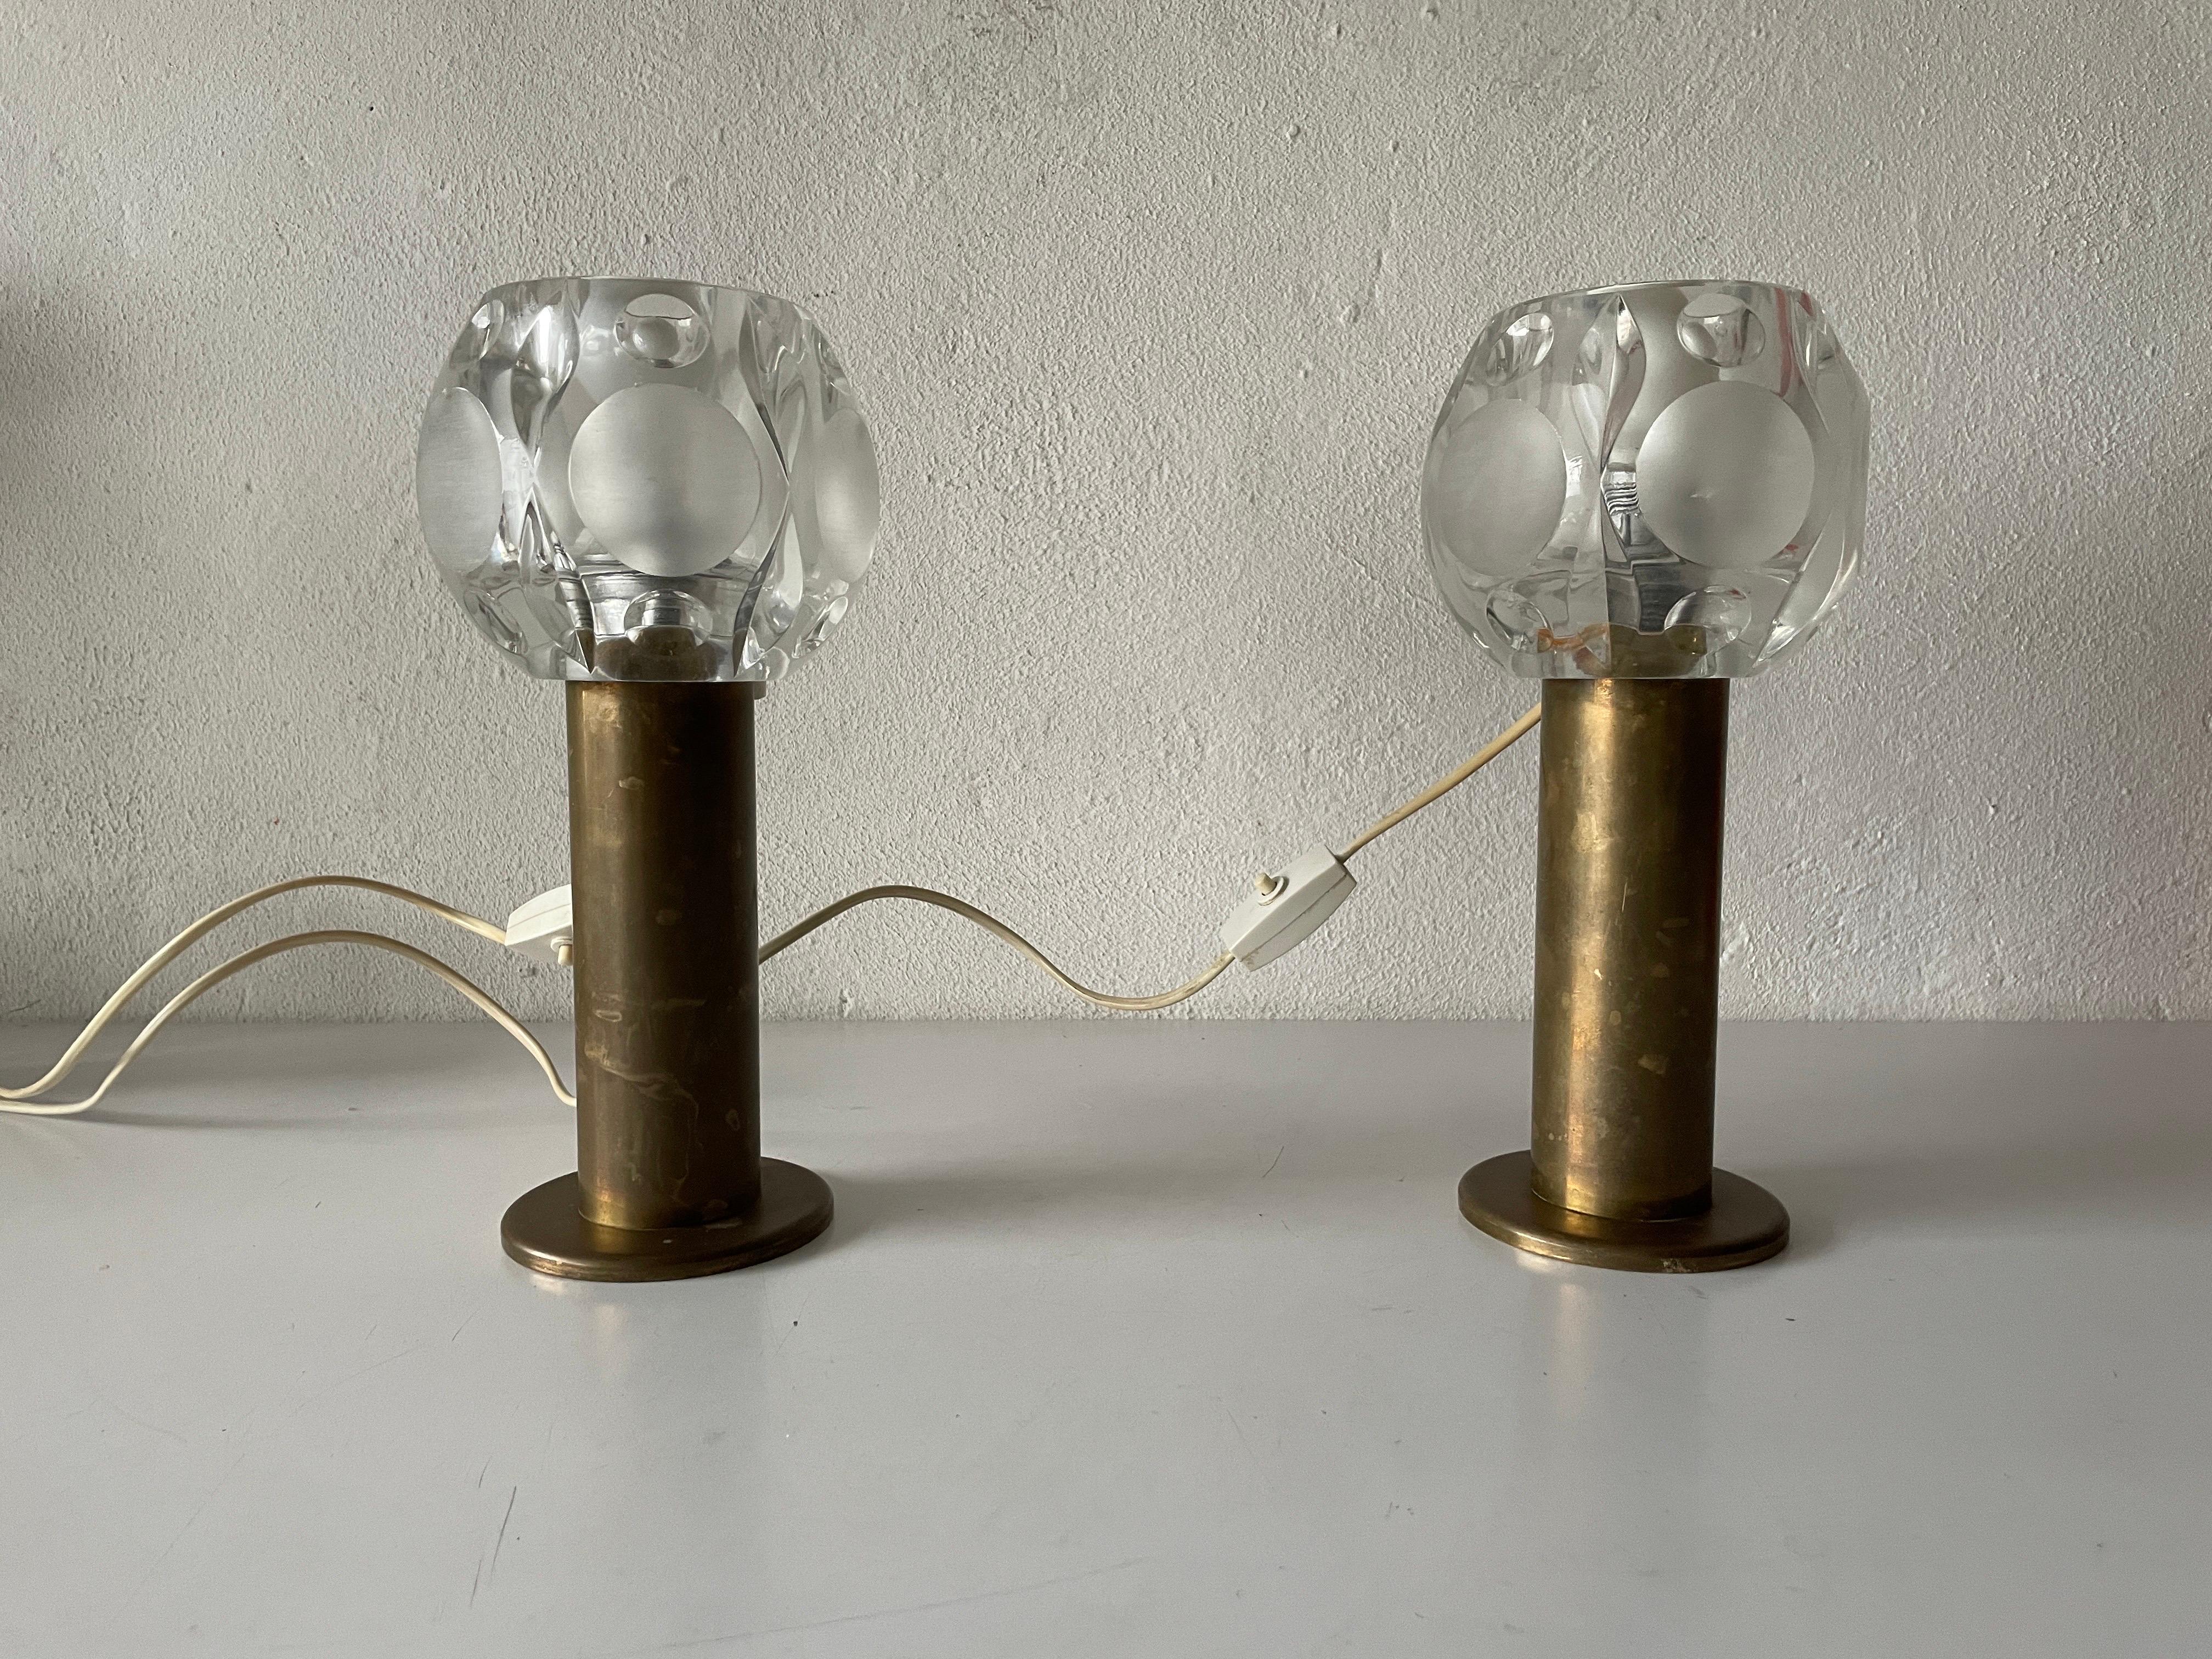 Gorgeous heavy glass and antique brass body pair of large table lamps by Peill und Putzler, 1960s, Germany.

Lampshade is in very good vintage condition.

It has European plug. It can be converted to other countries plugs with using converter.